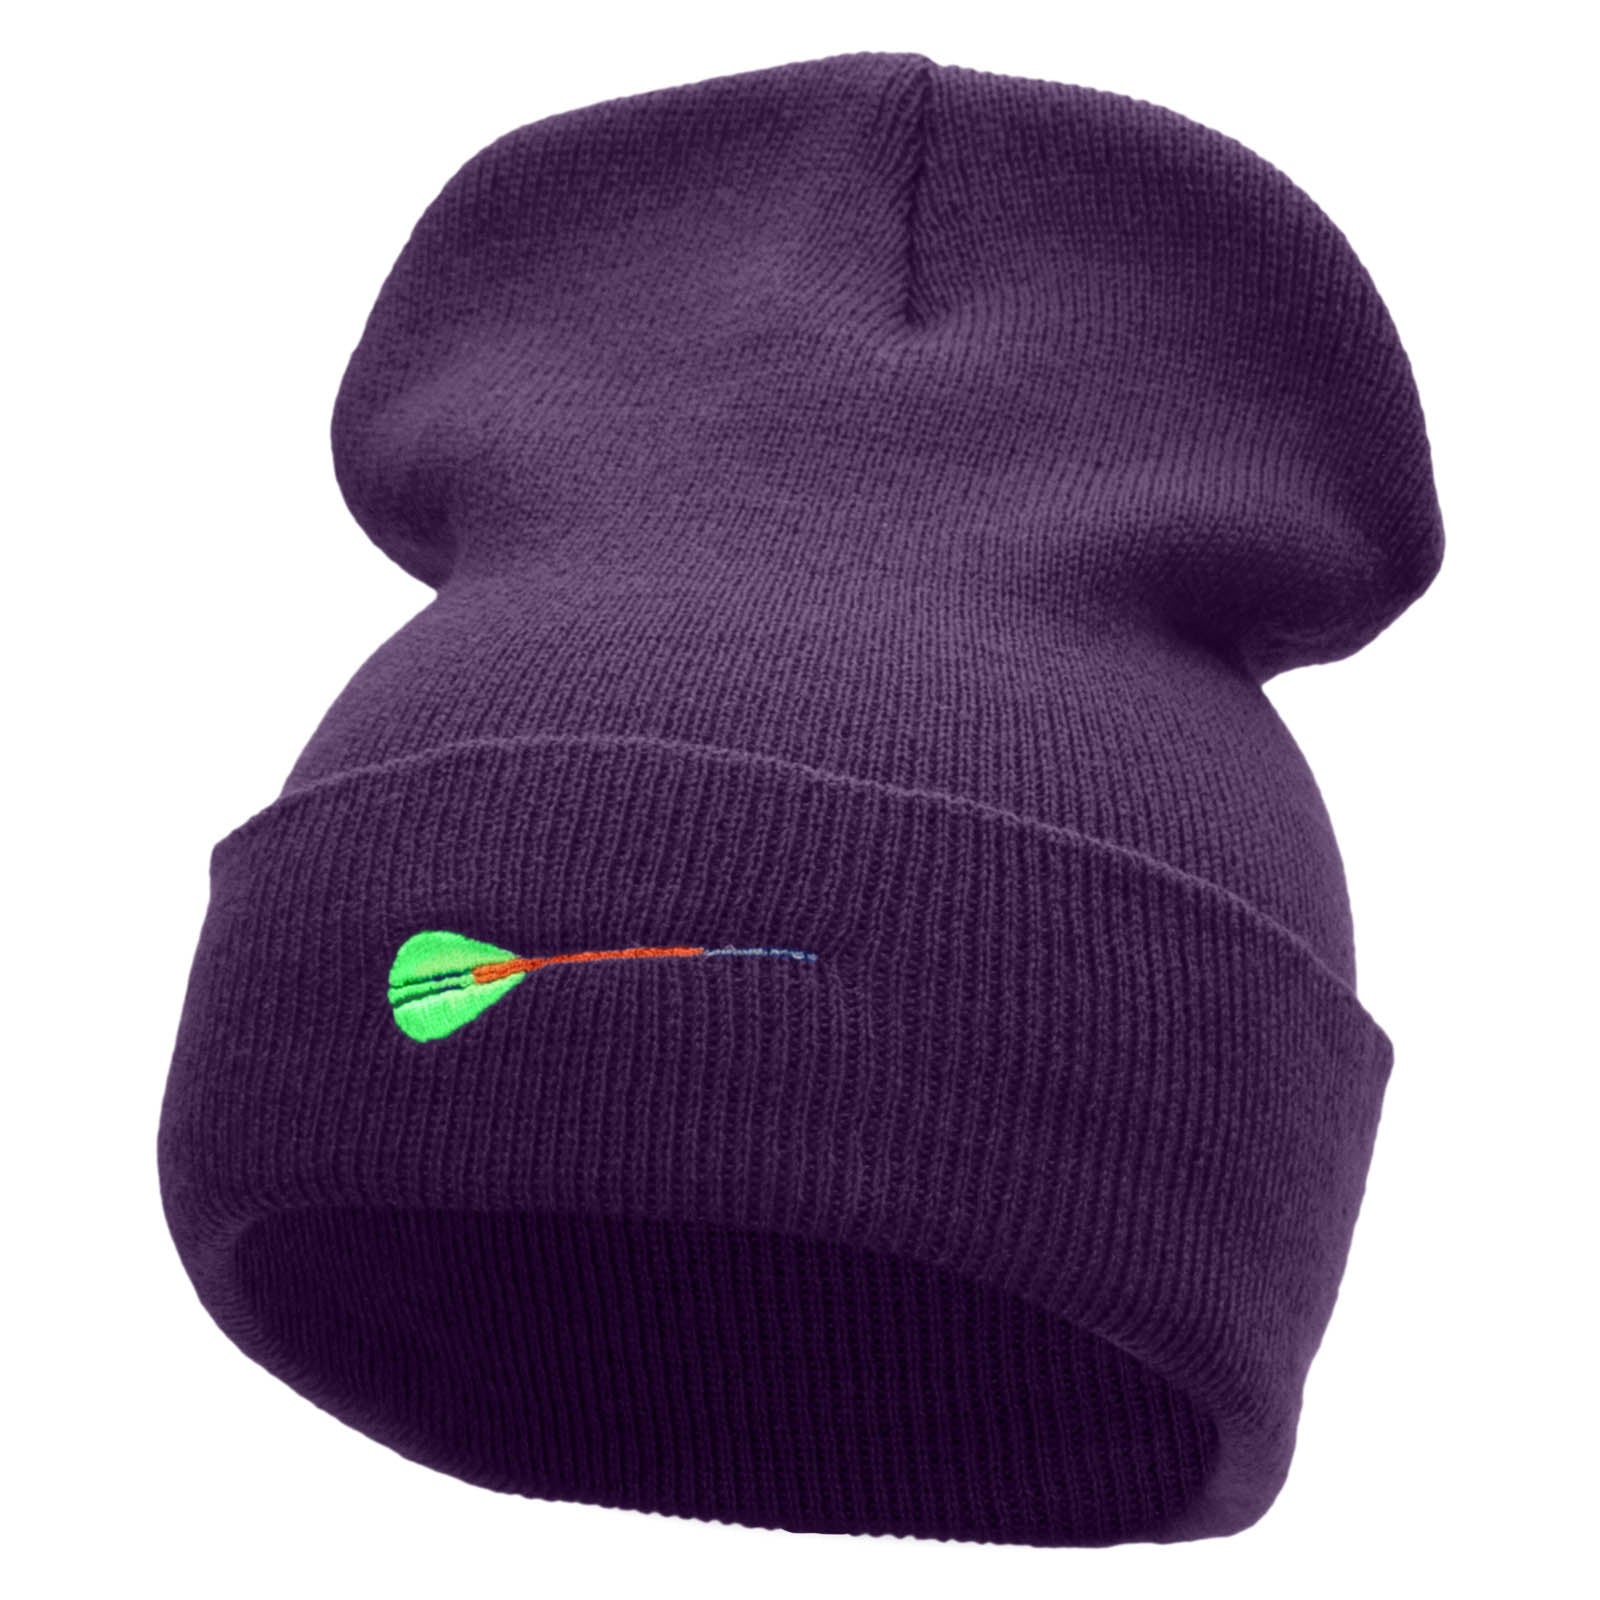 The Dart Embroidered 12 Inch Solid Long Beanie Made in USA - Purple OSFM